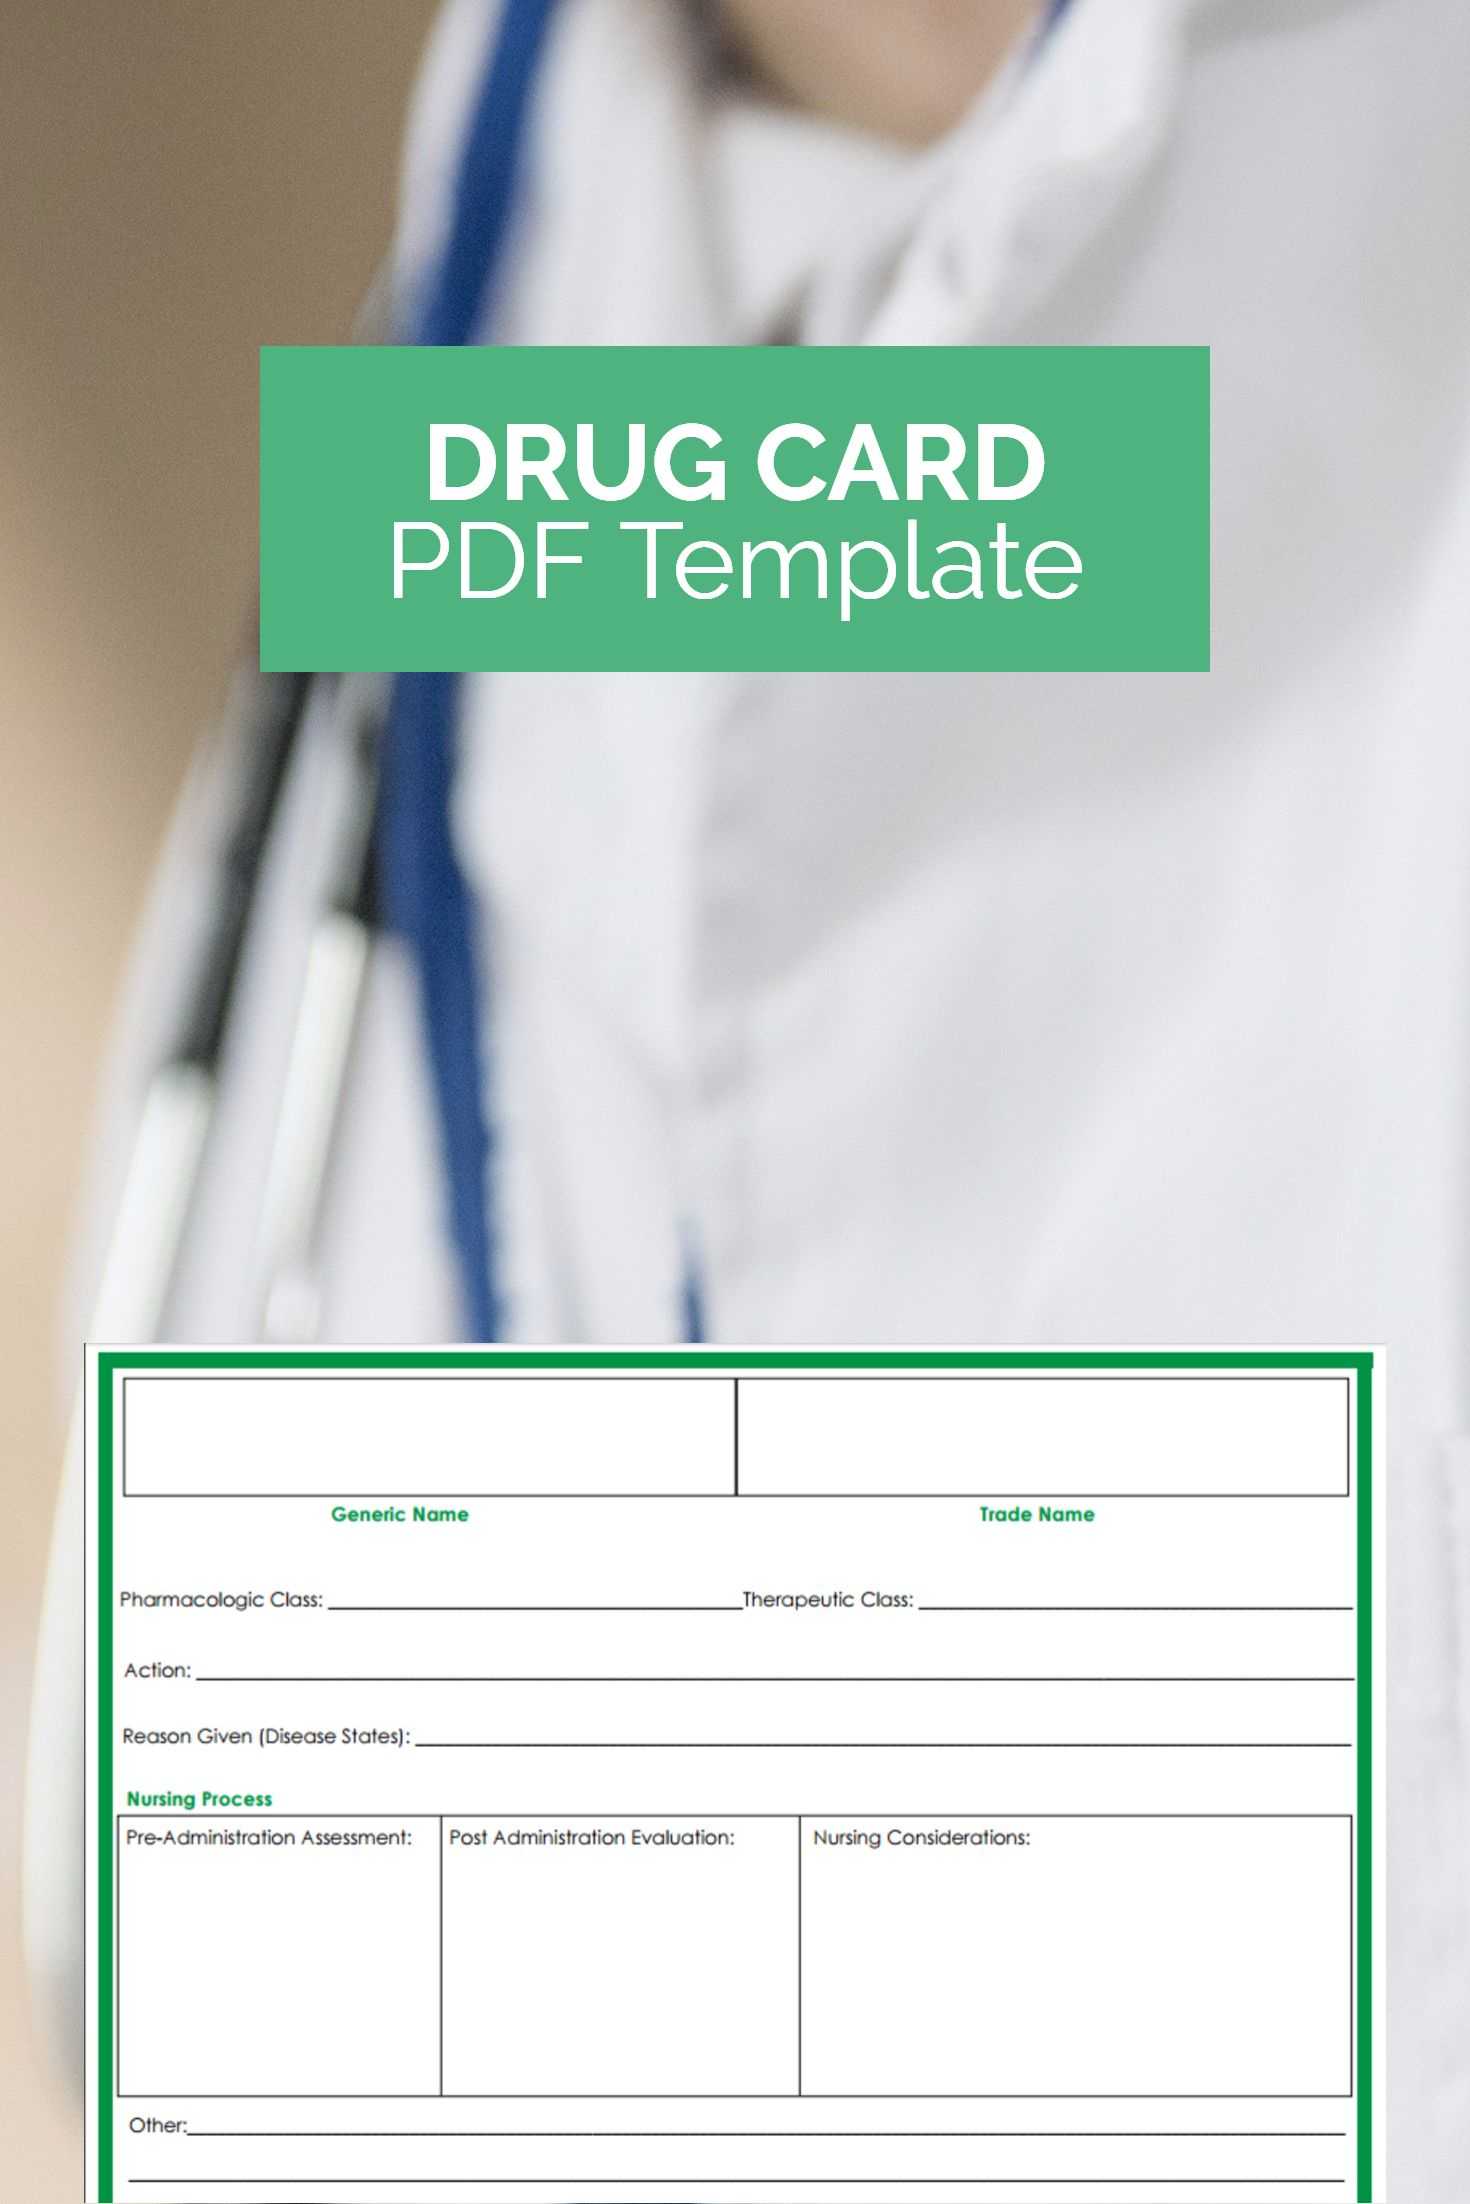 Want A Free Drug Card Template That Can Make Studying Much Regarding Med Cards Template